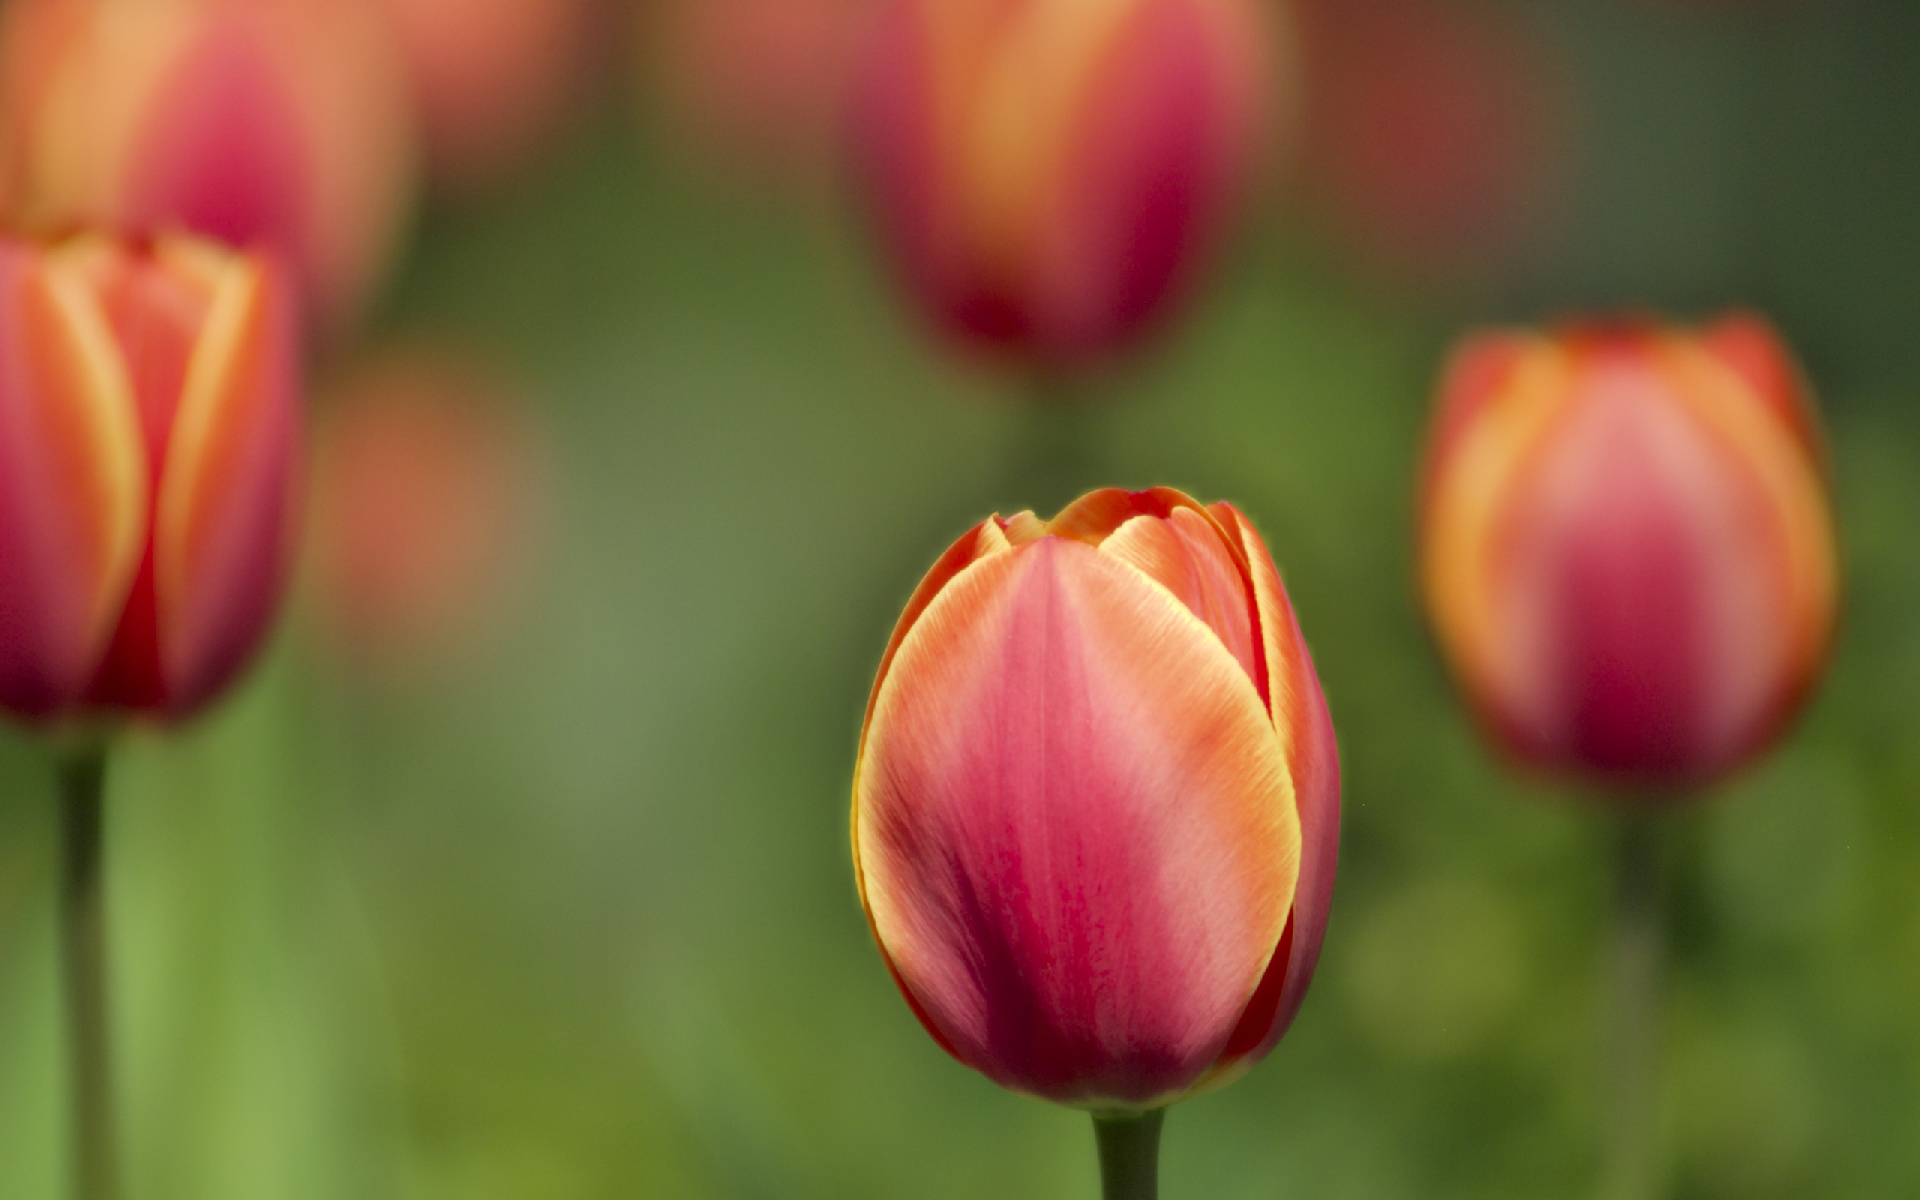 Low Dof Tulips Best Background Full HD1920x1080p, 1280x720p, – HD Wallpapers Backgrounds Desktop, iphone & Android Free Download